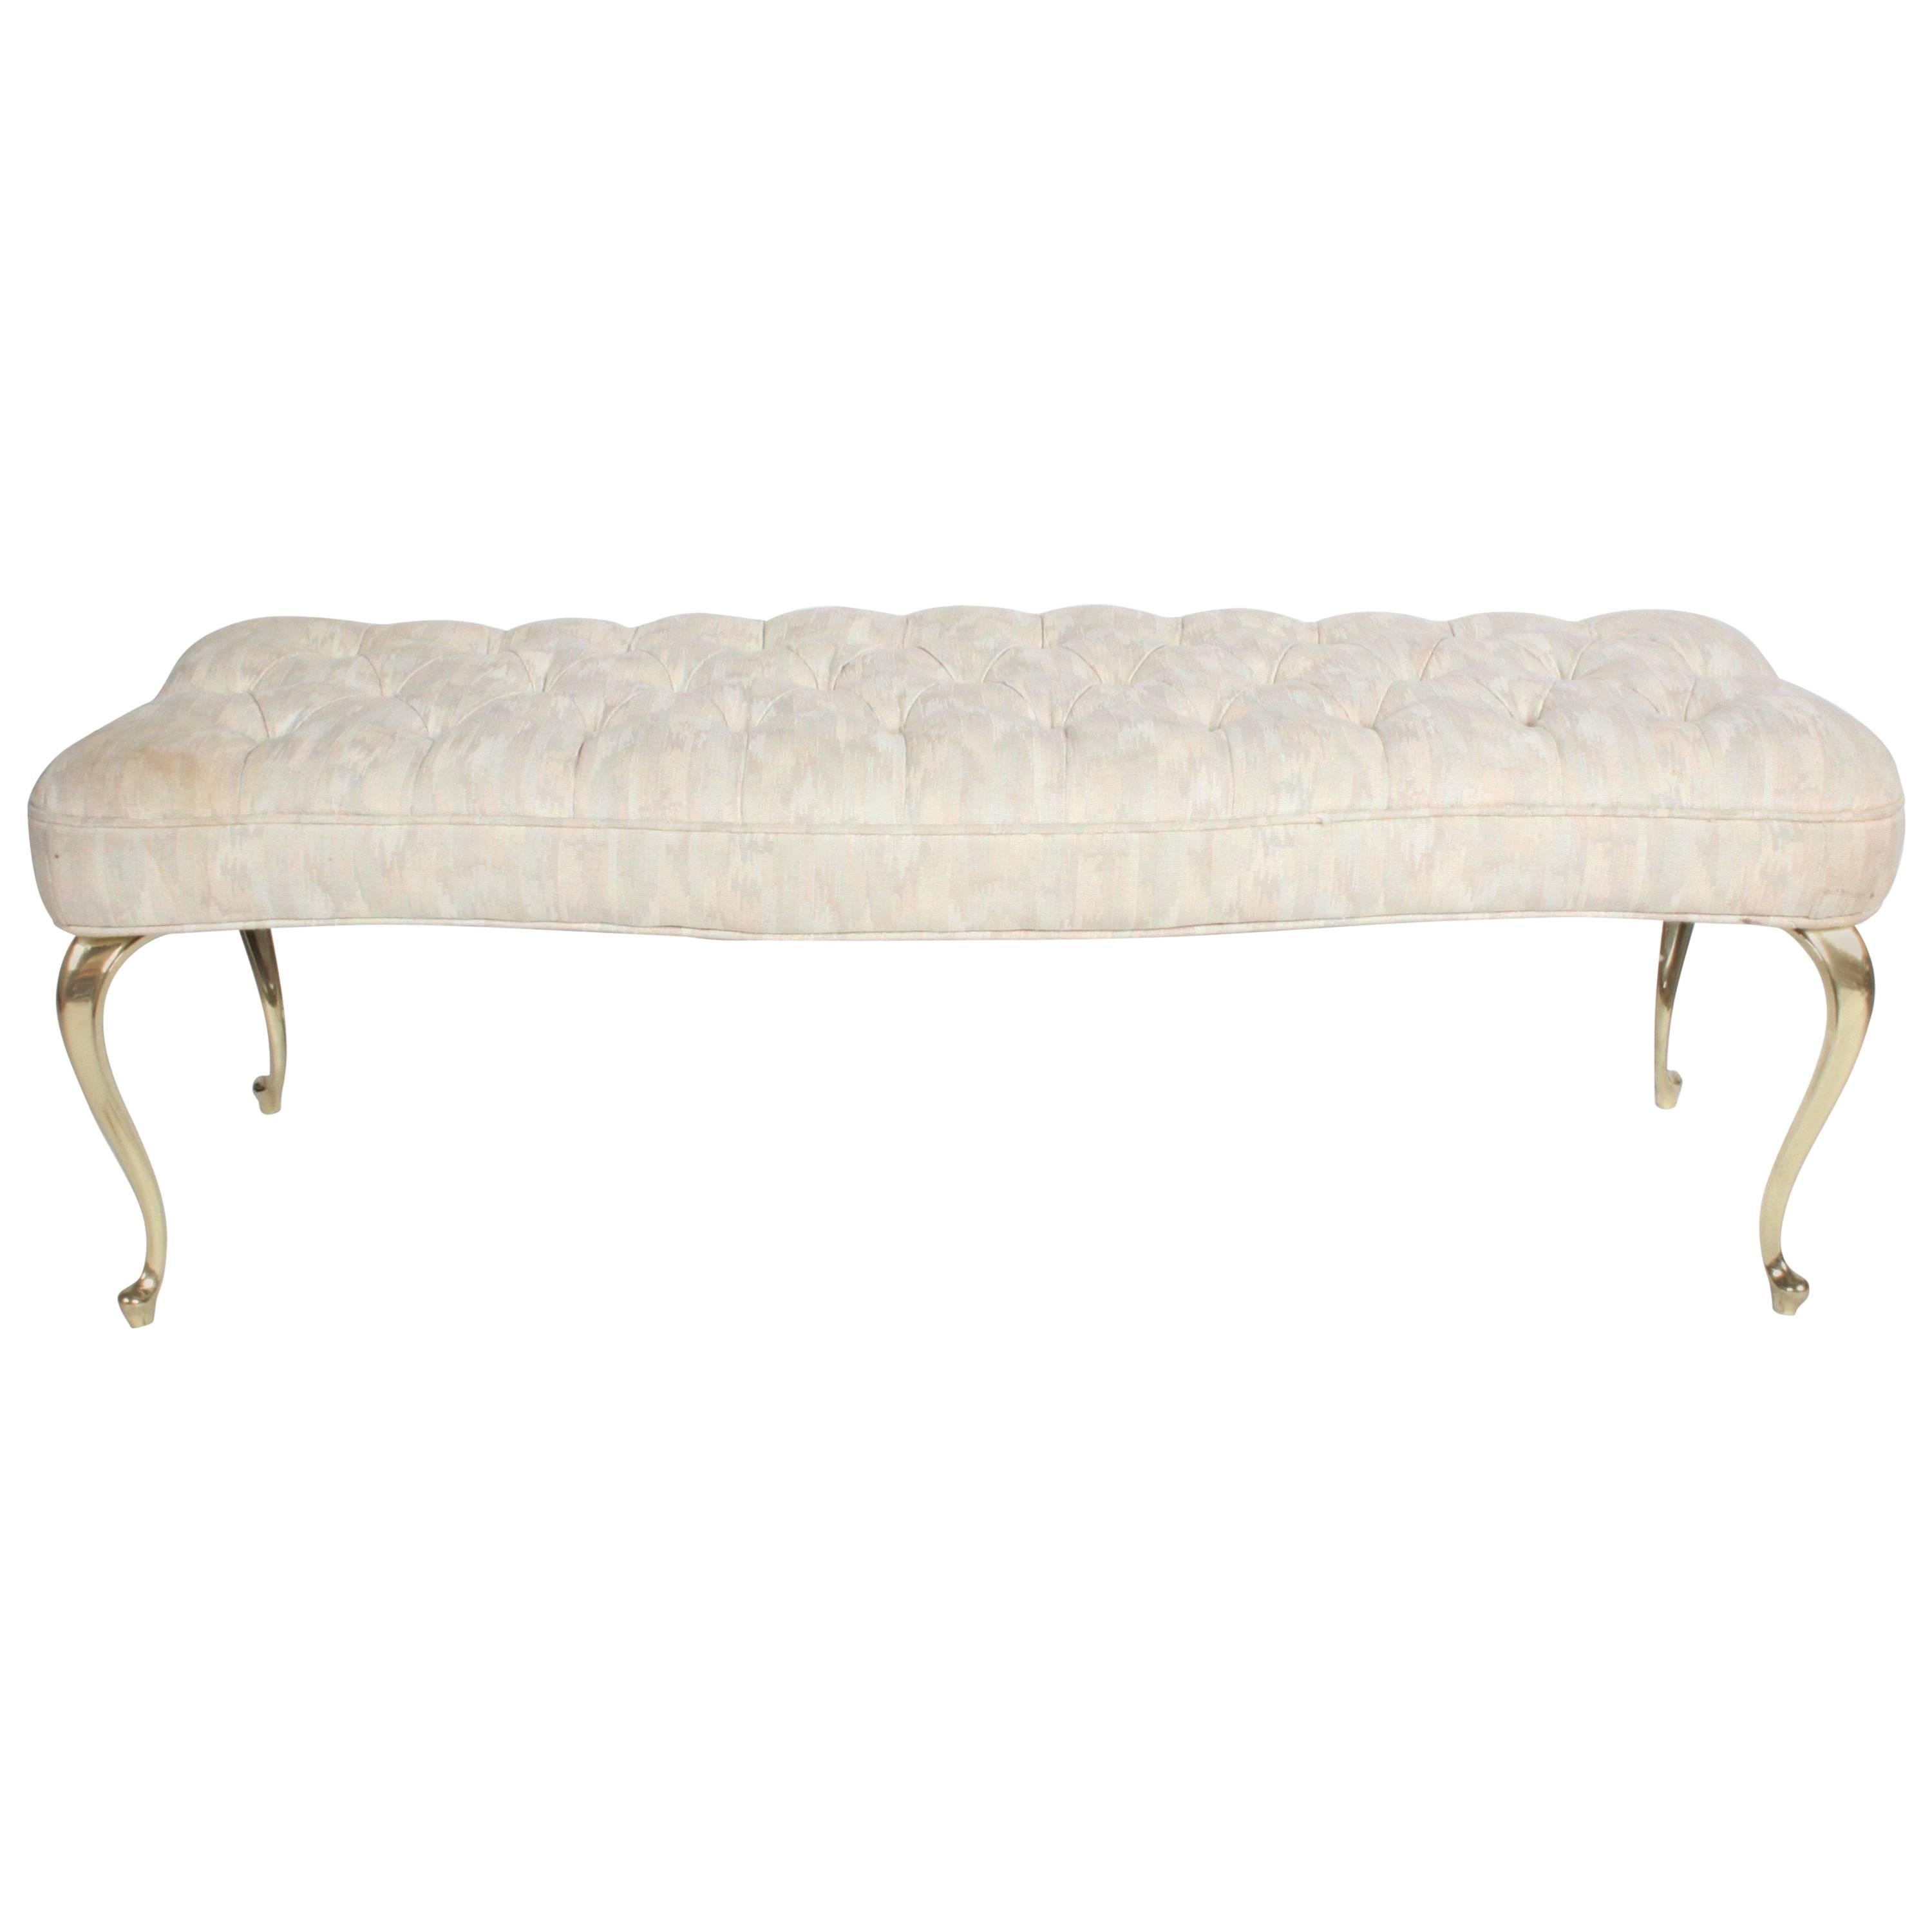 Hollywood Regency Tufted Bench with Brass Legs For Sale